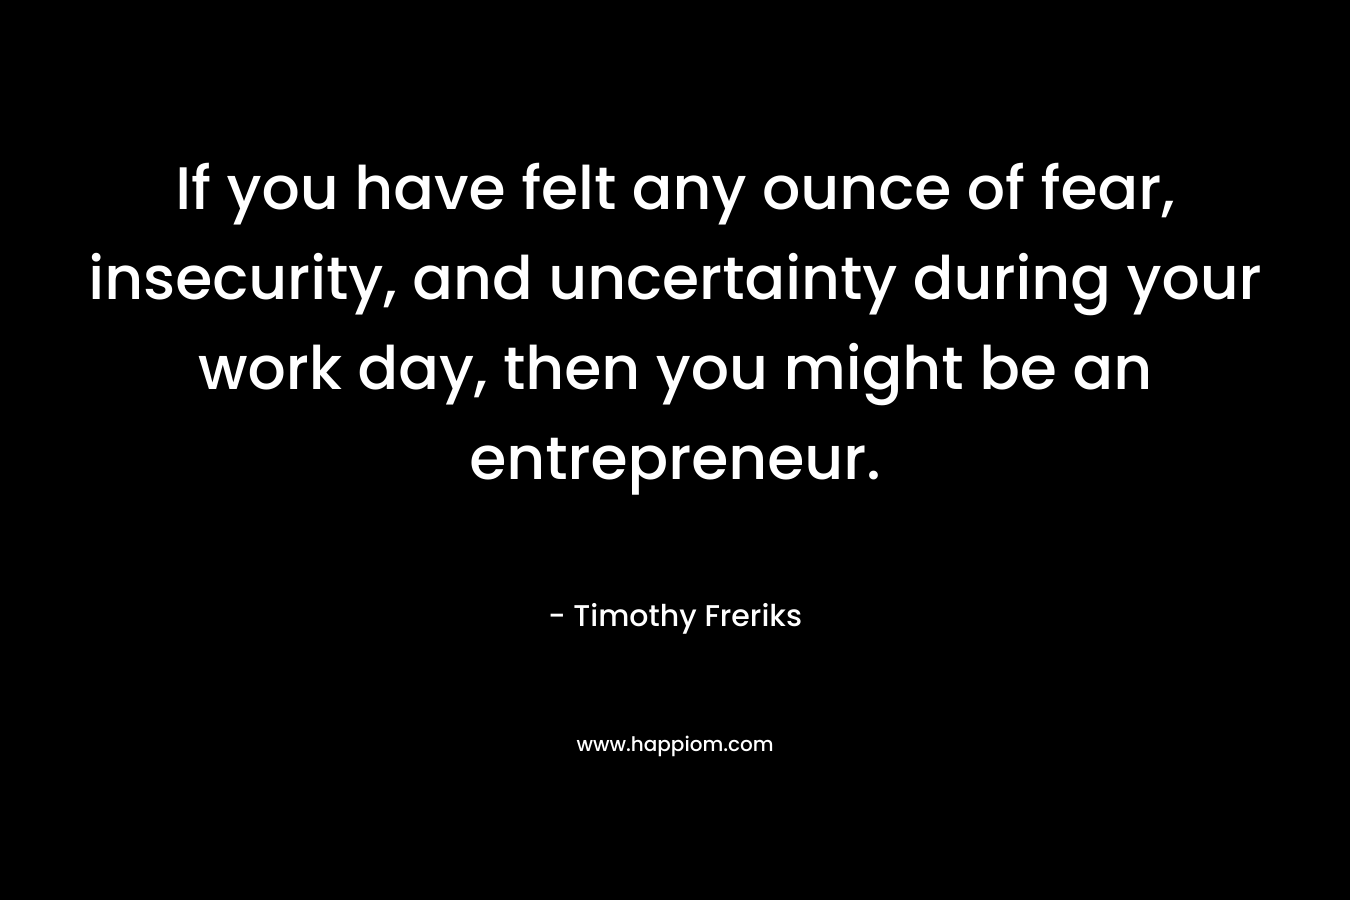 If you have felt any ounce of fear, insecurity, and uncertainty during your work day, then you might be an entrepreneur.